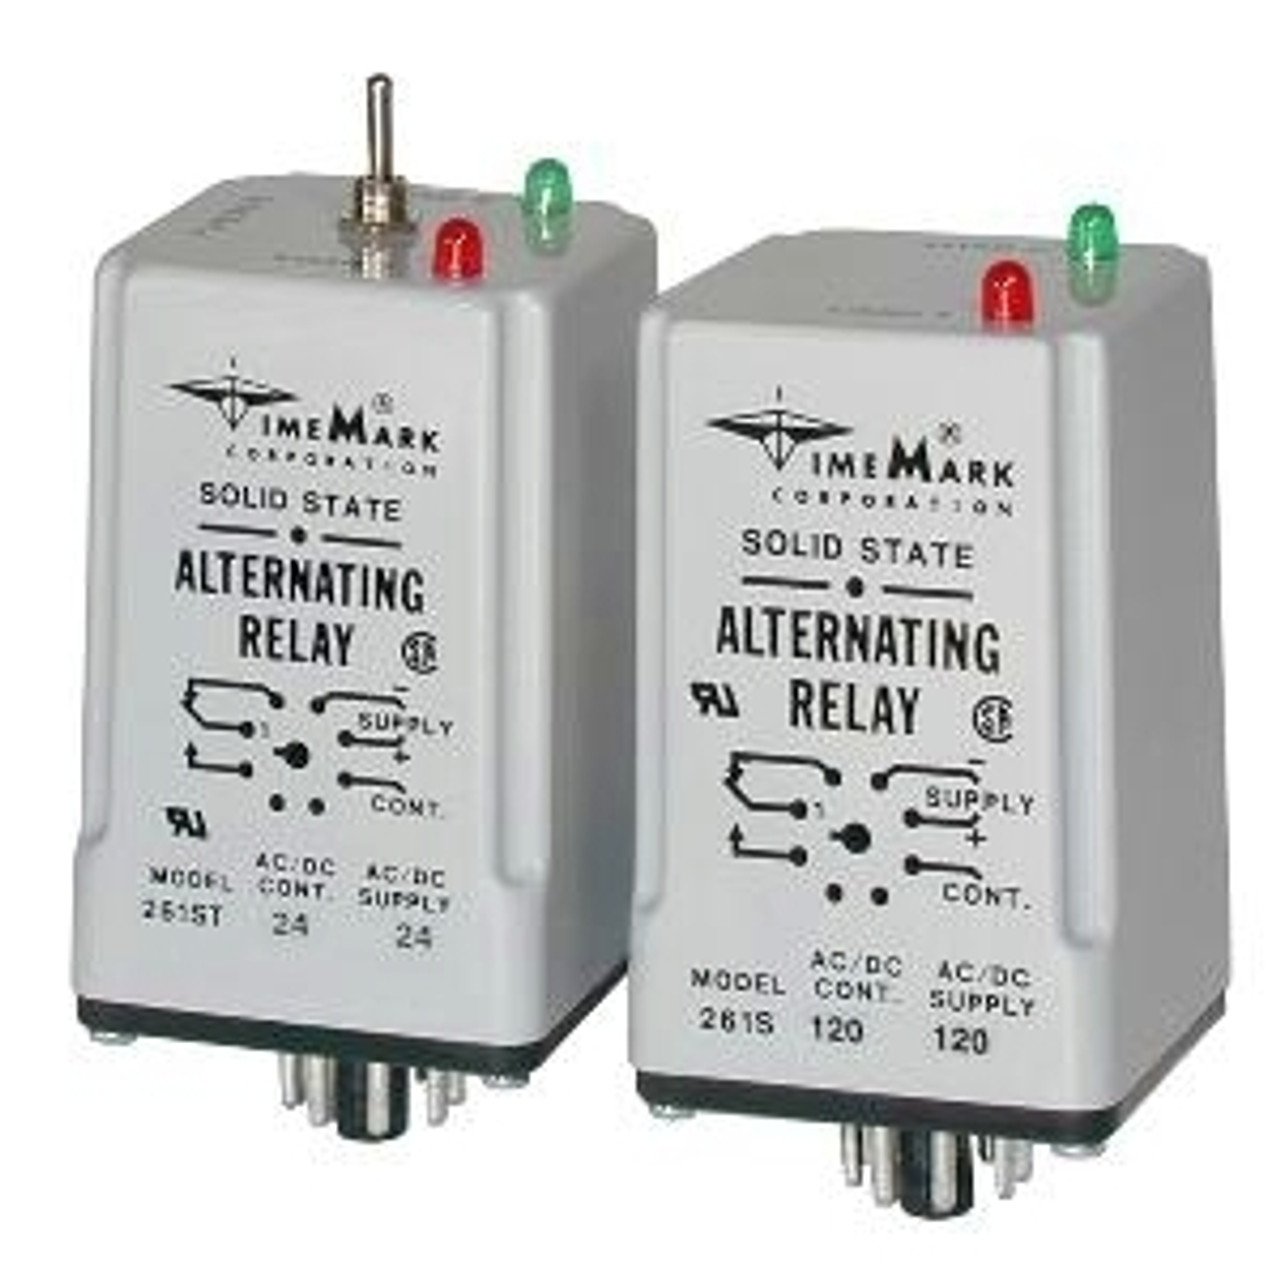 TimeMark 261-D-24 Alternating Sequencing Relay